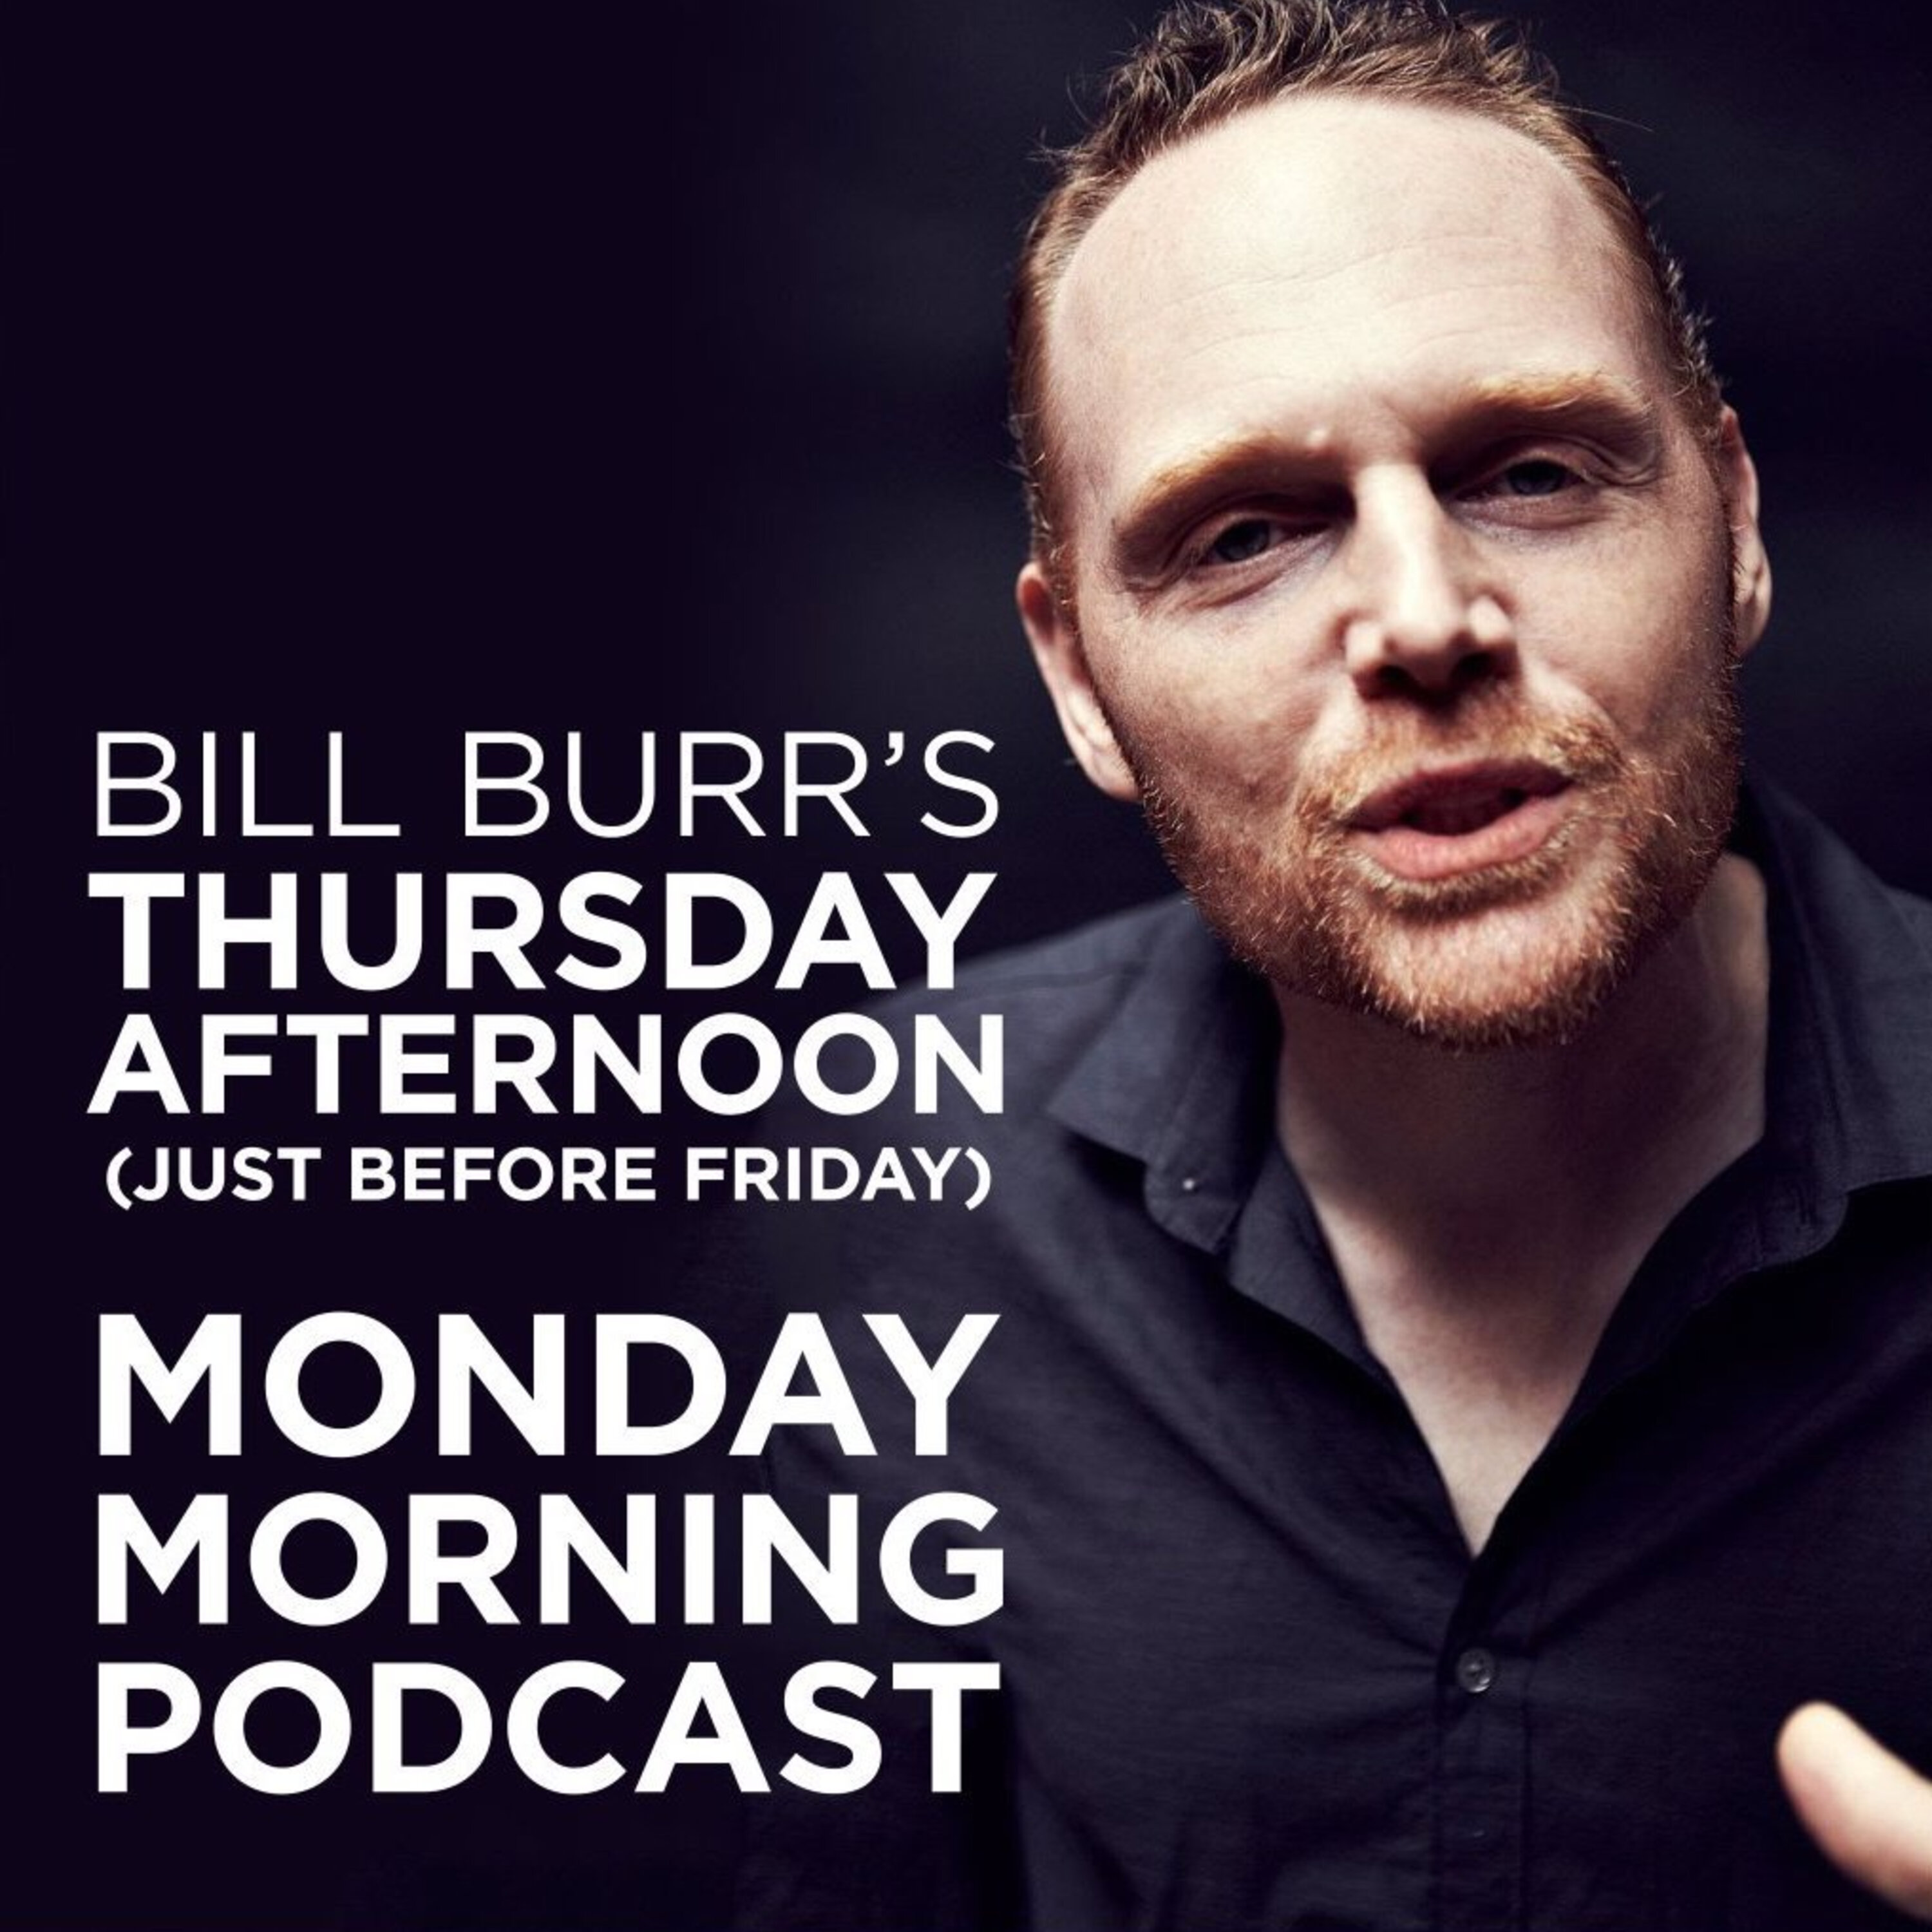 Thursday Afternoon Monday Morning Podcast 8-4-22 by All Things Comedy